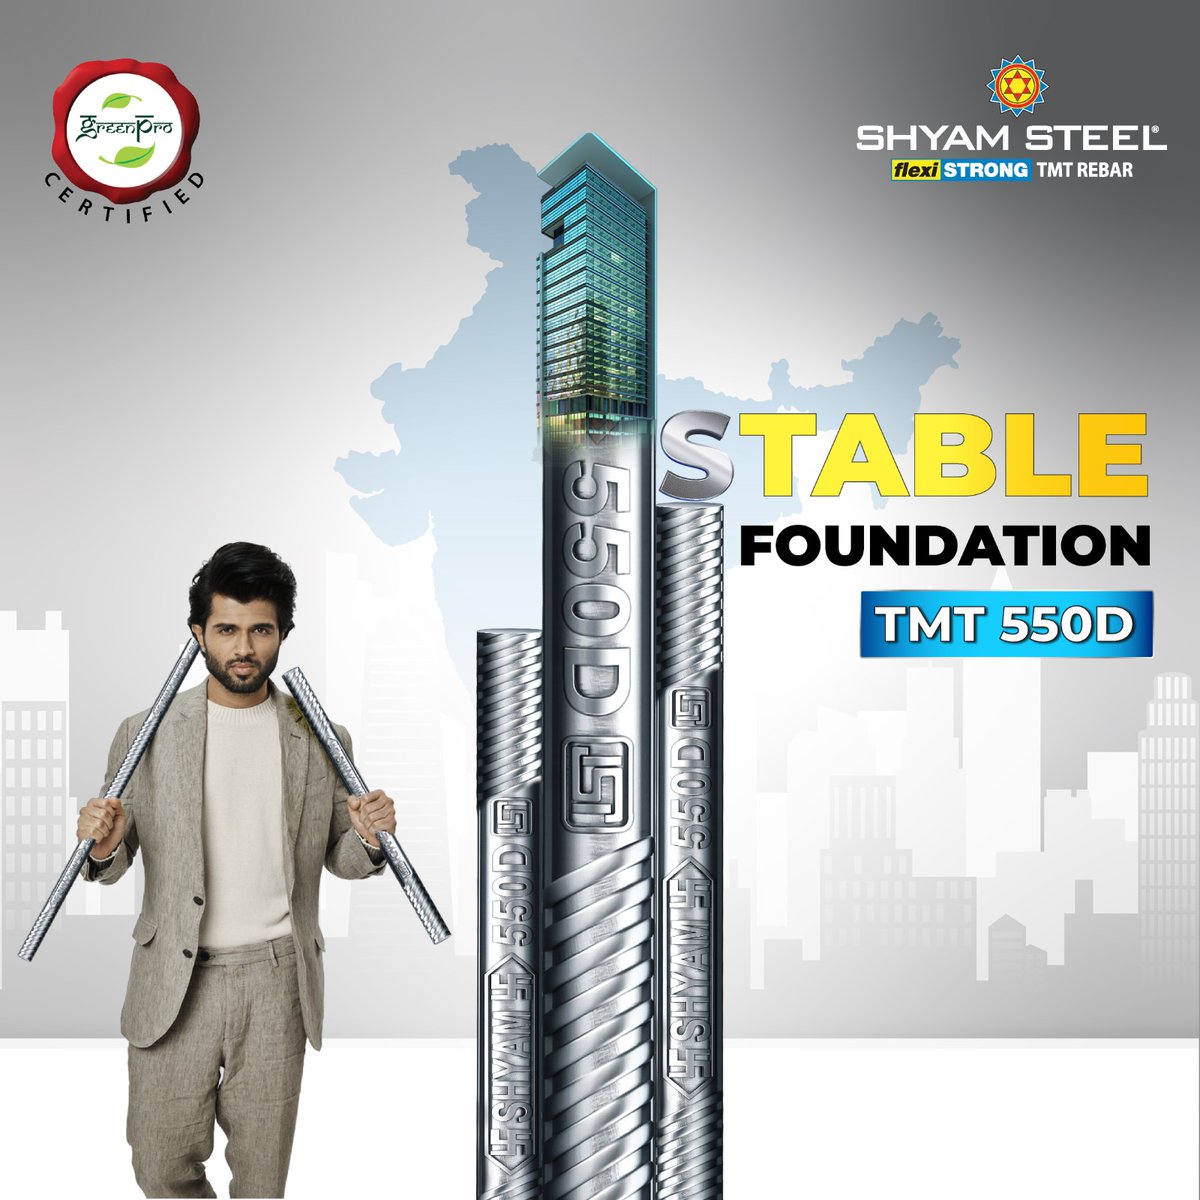 Be towering skyscrapers, complex and vital infrastructural projects or your humble abode. Shyam Steel 550D TMT bars provide the essential foundation, ensuring structures remain steadfast in the face of adversity.

#ShyamSteelIndia #TrusterdBrand #Flexibility #Strength…